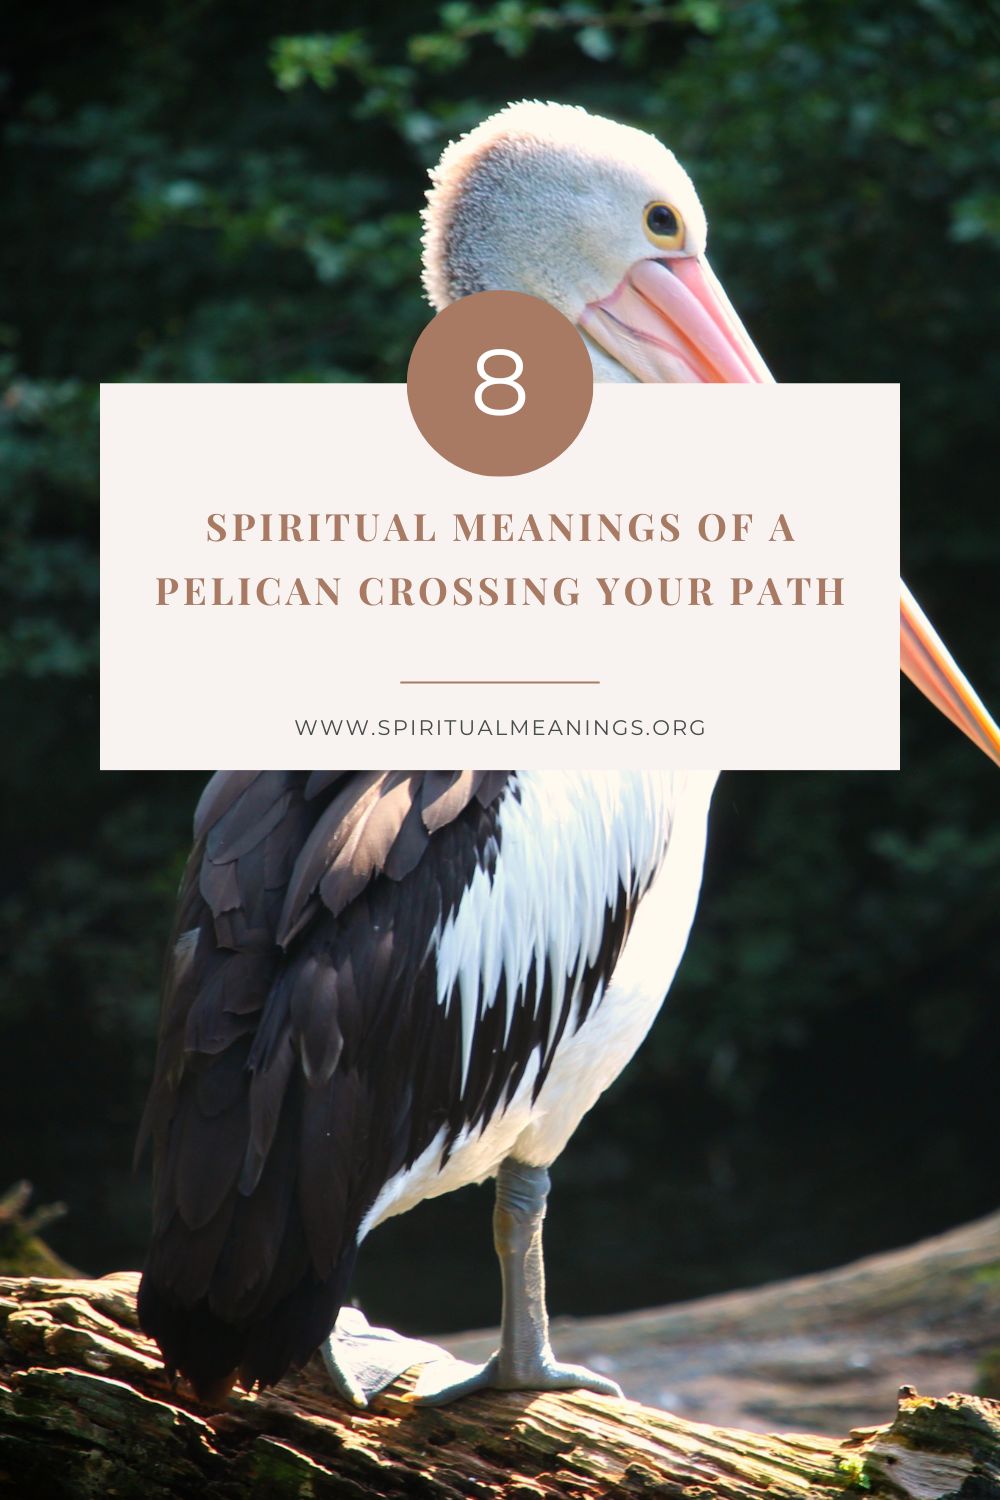 What Does It Mean When a Pelican Crosses Your Path?